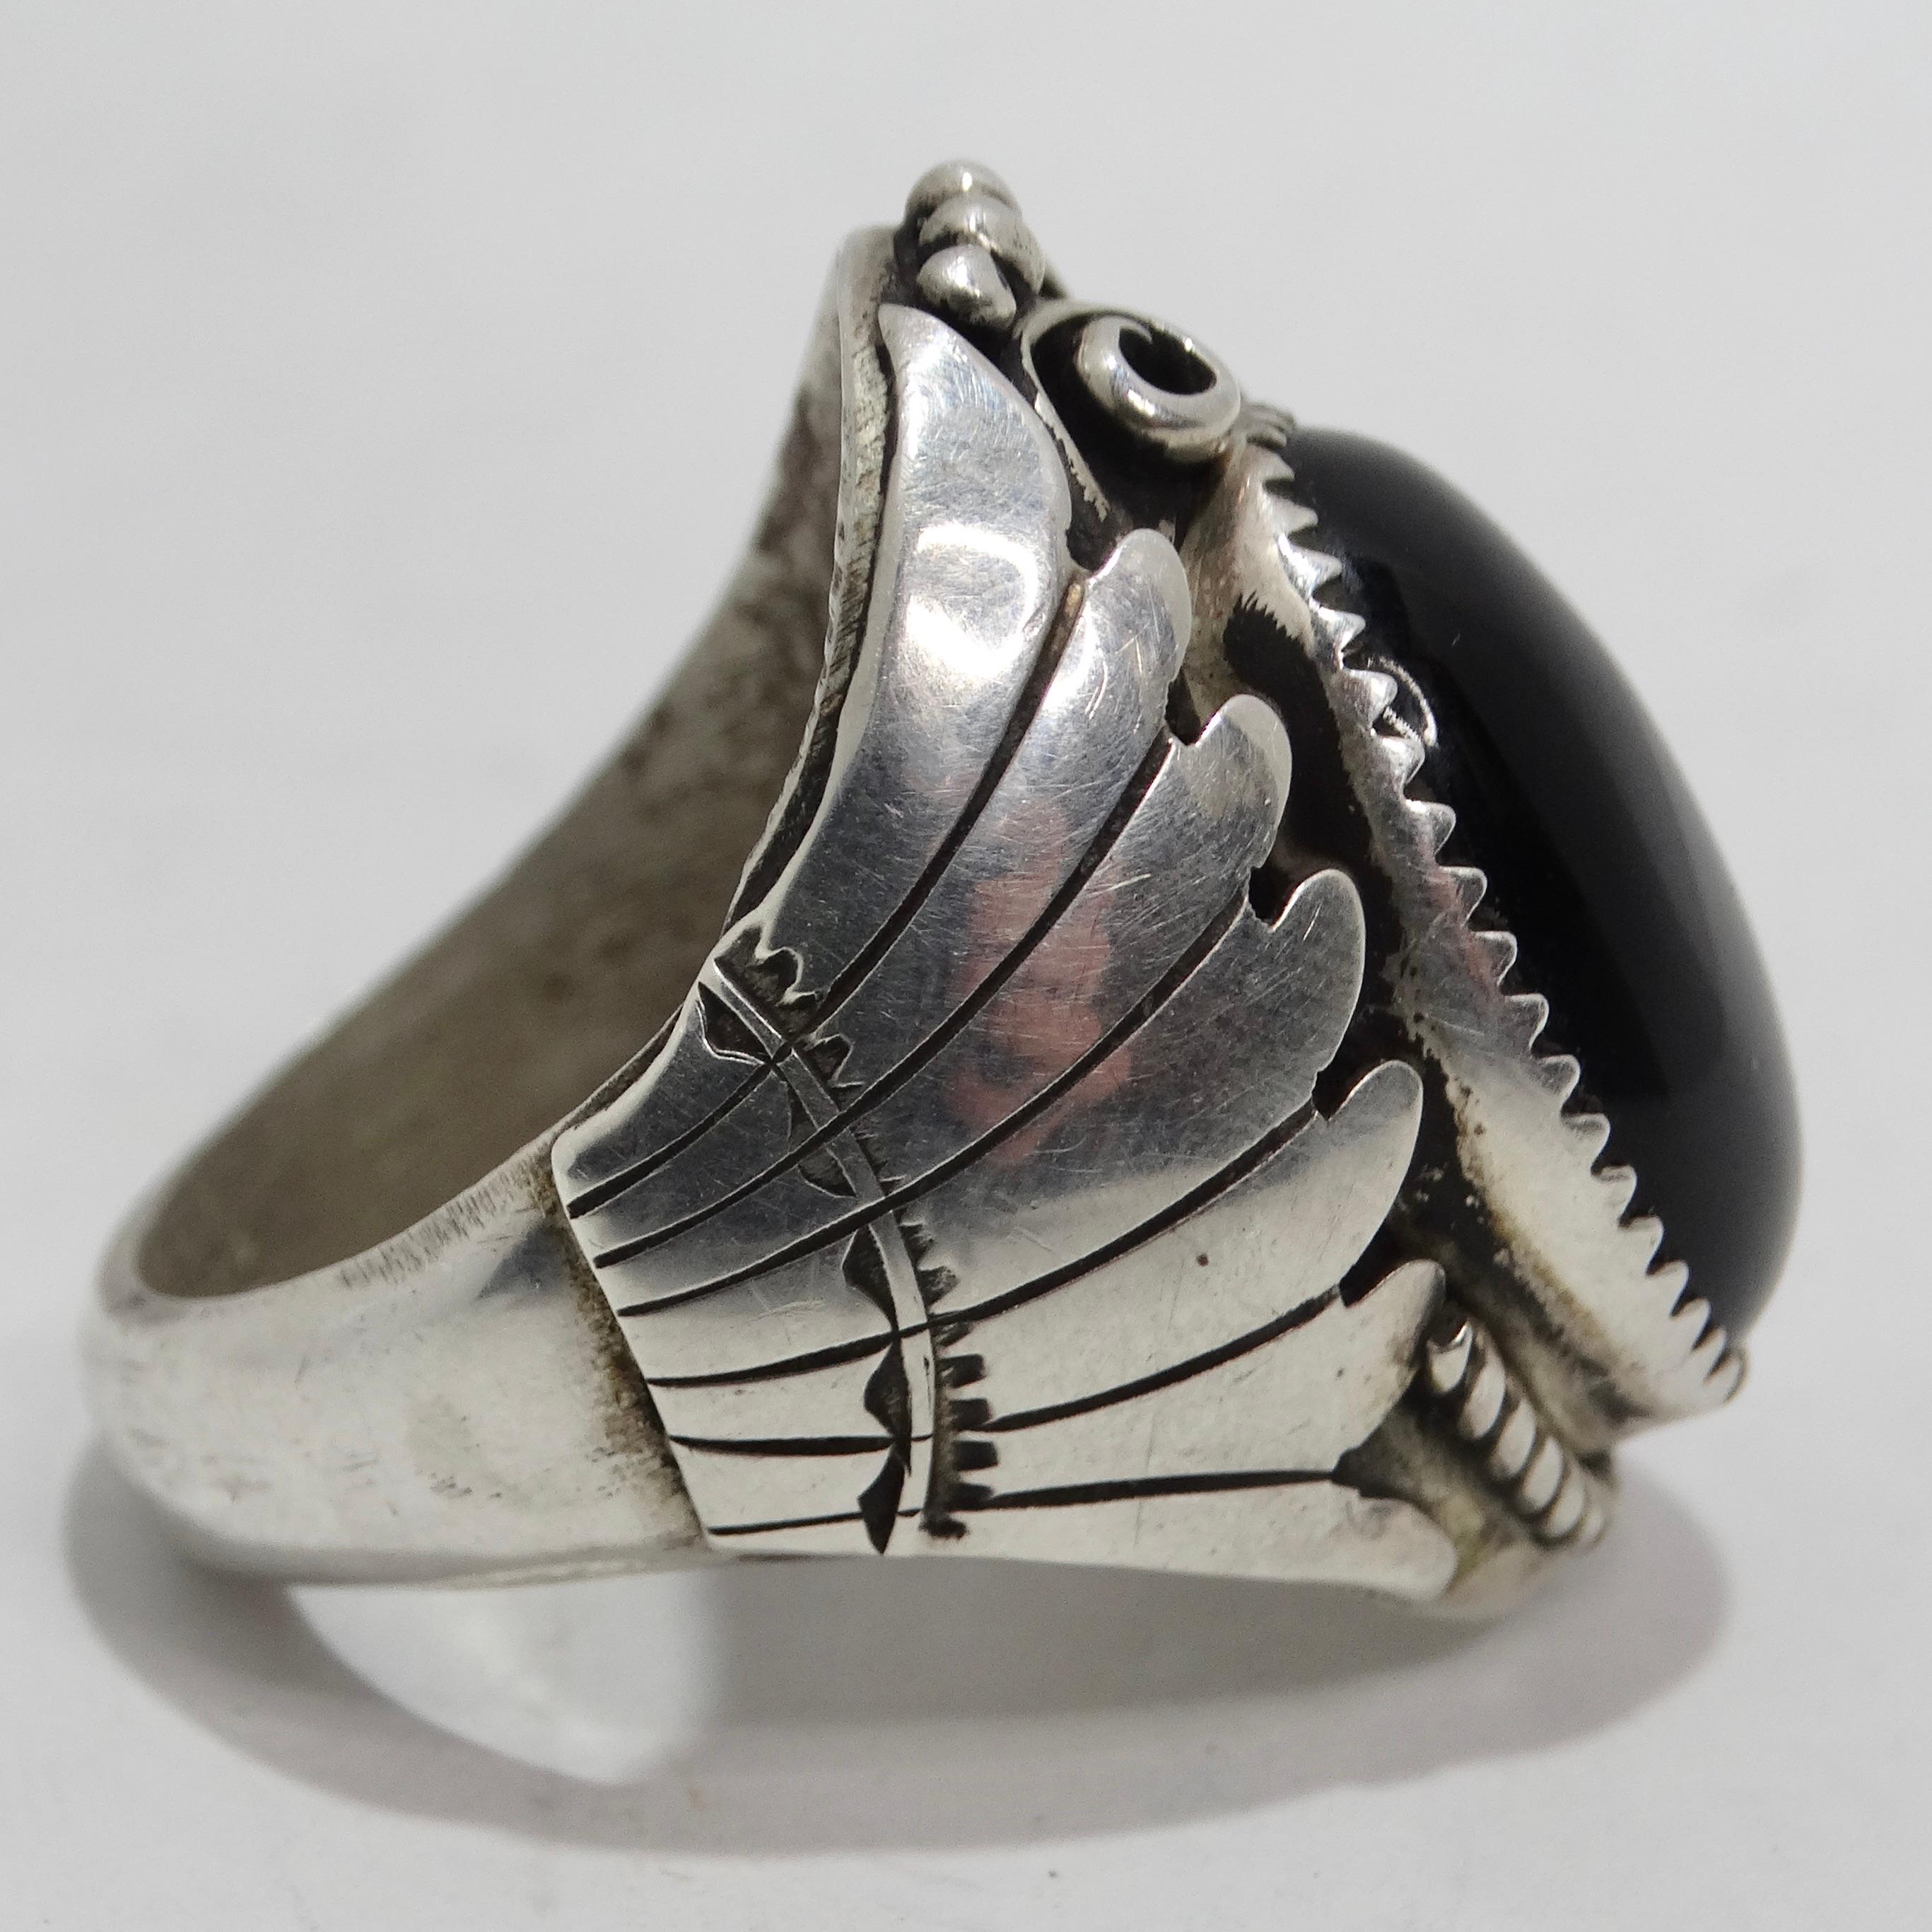 1970s Native American Silver Onyx Ring In Good Condition For Sale In Scottsdale, AZ